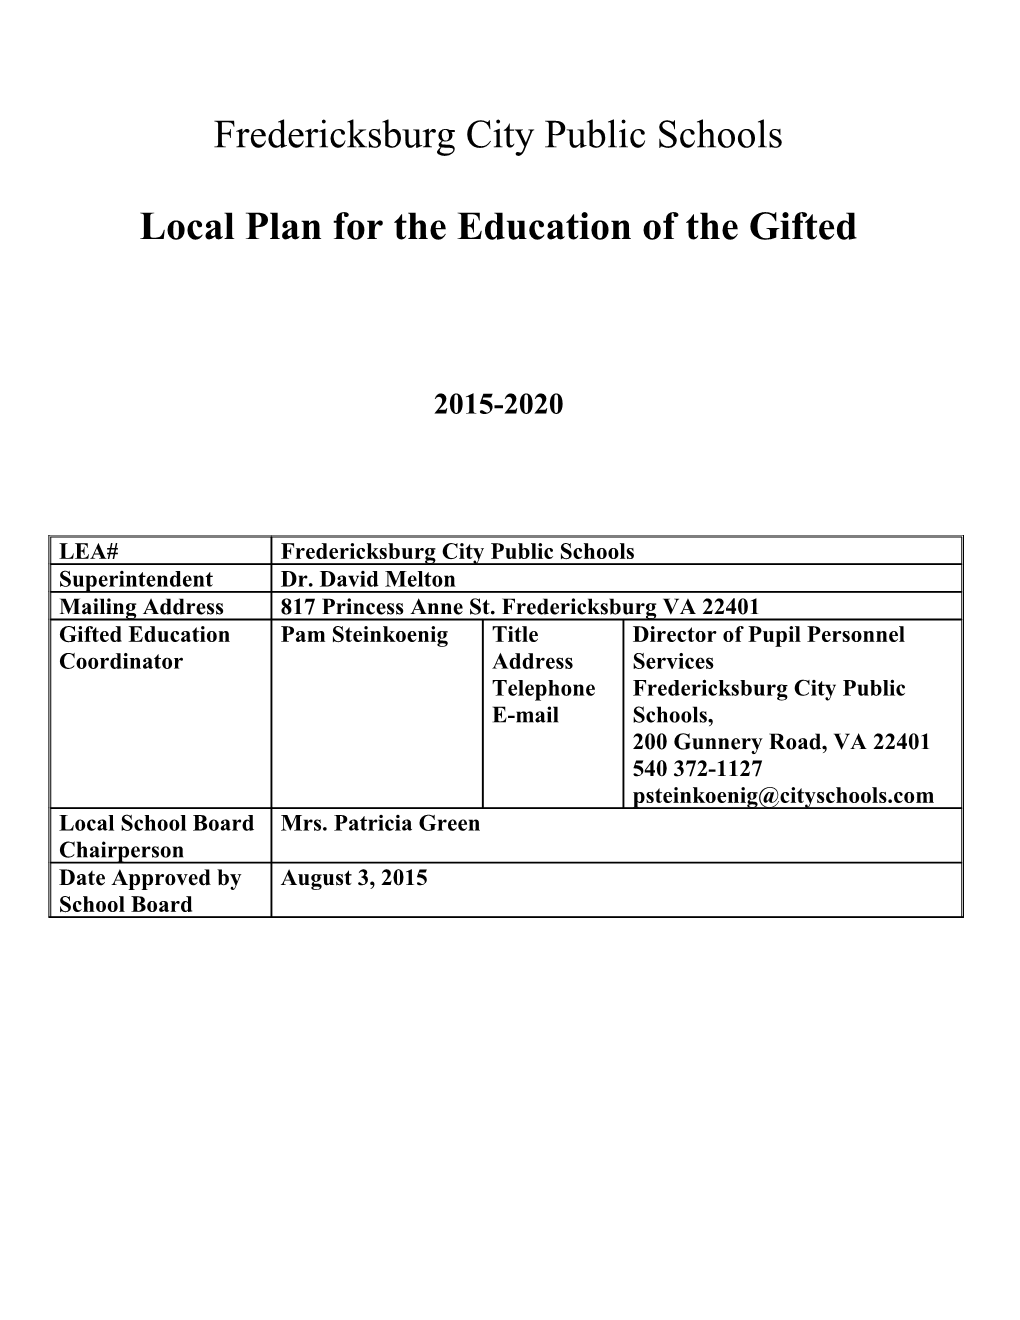 Local Plan for the Education of the Gifted